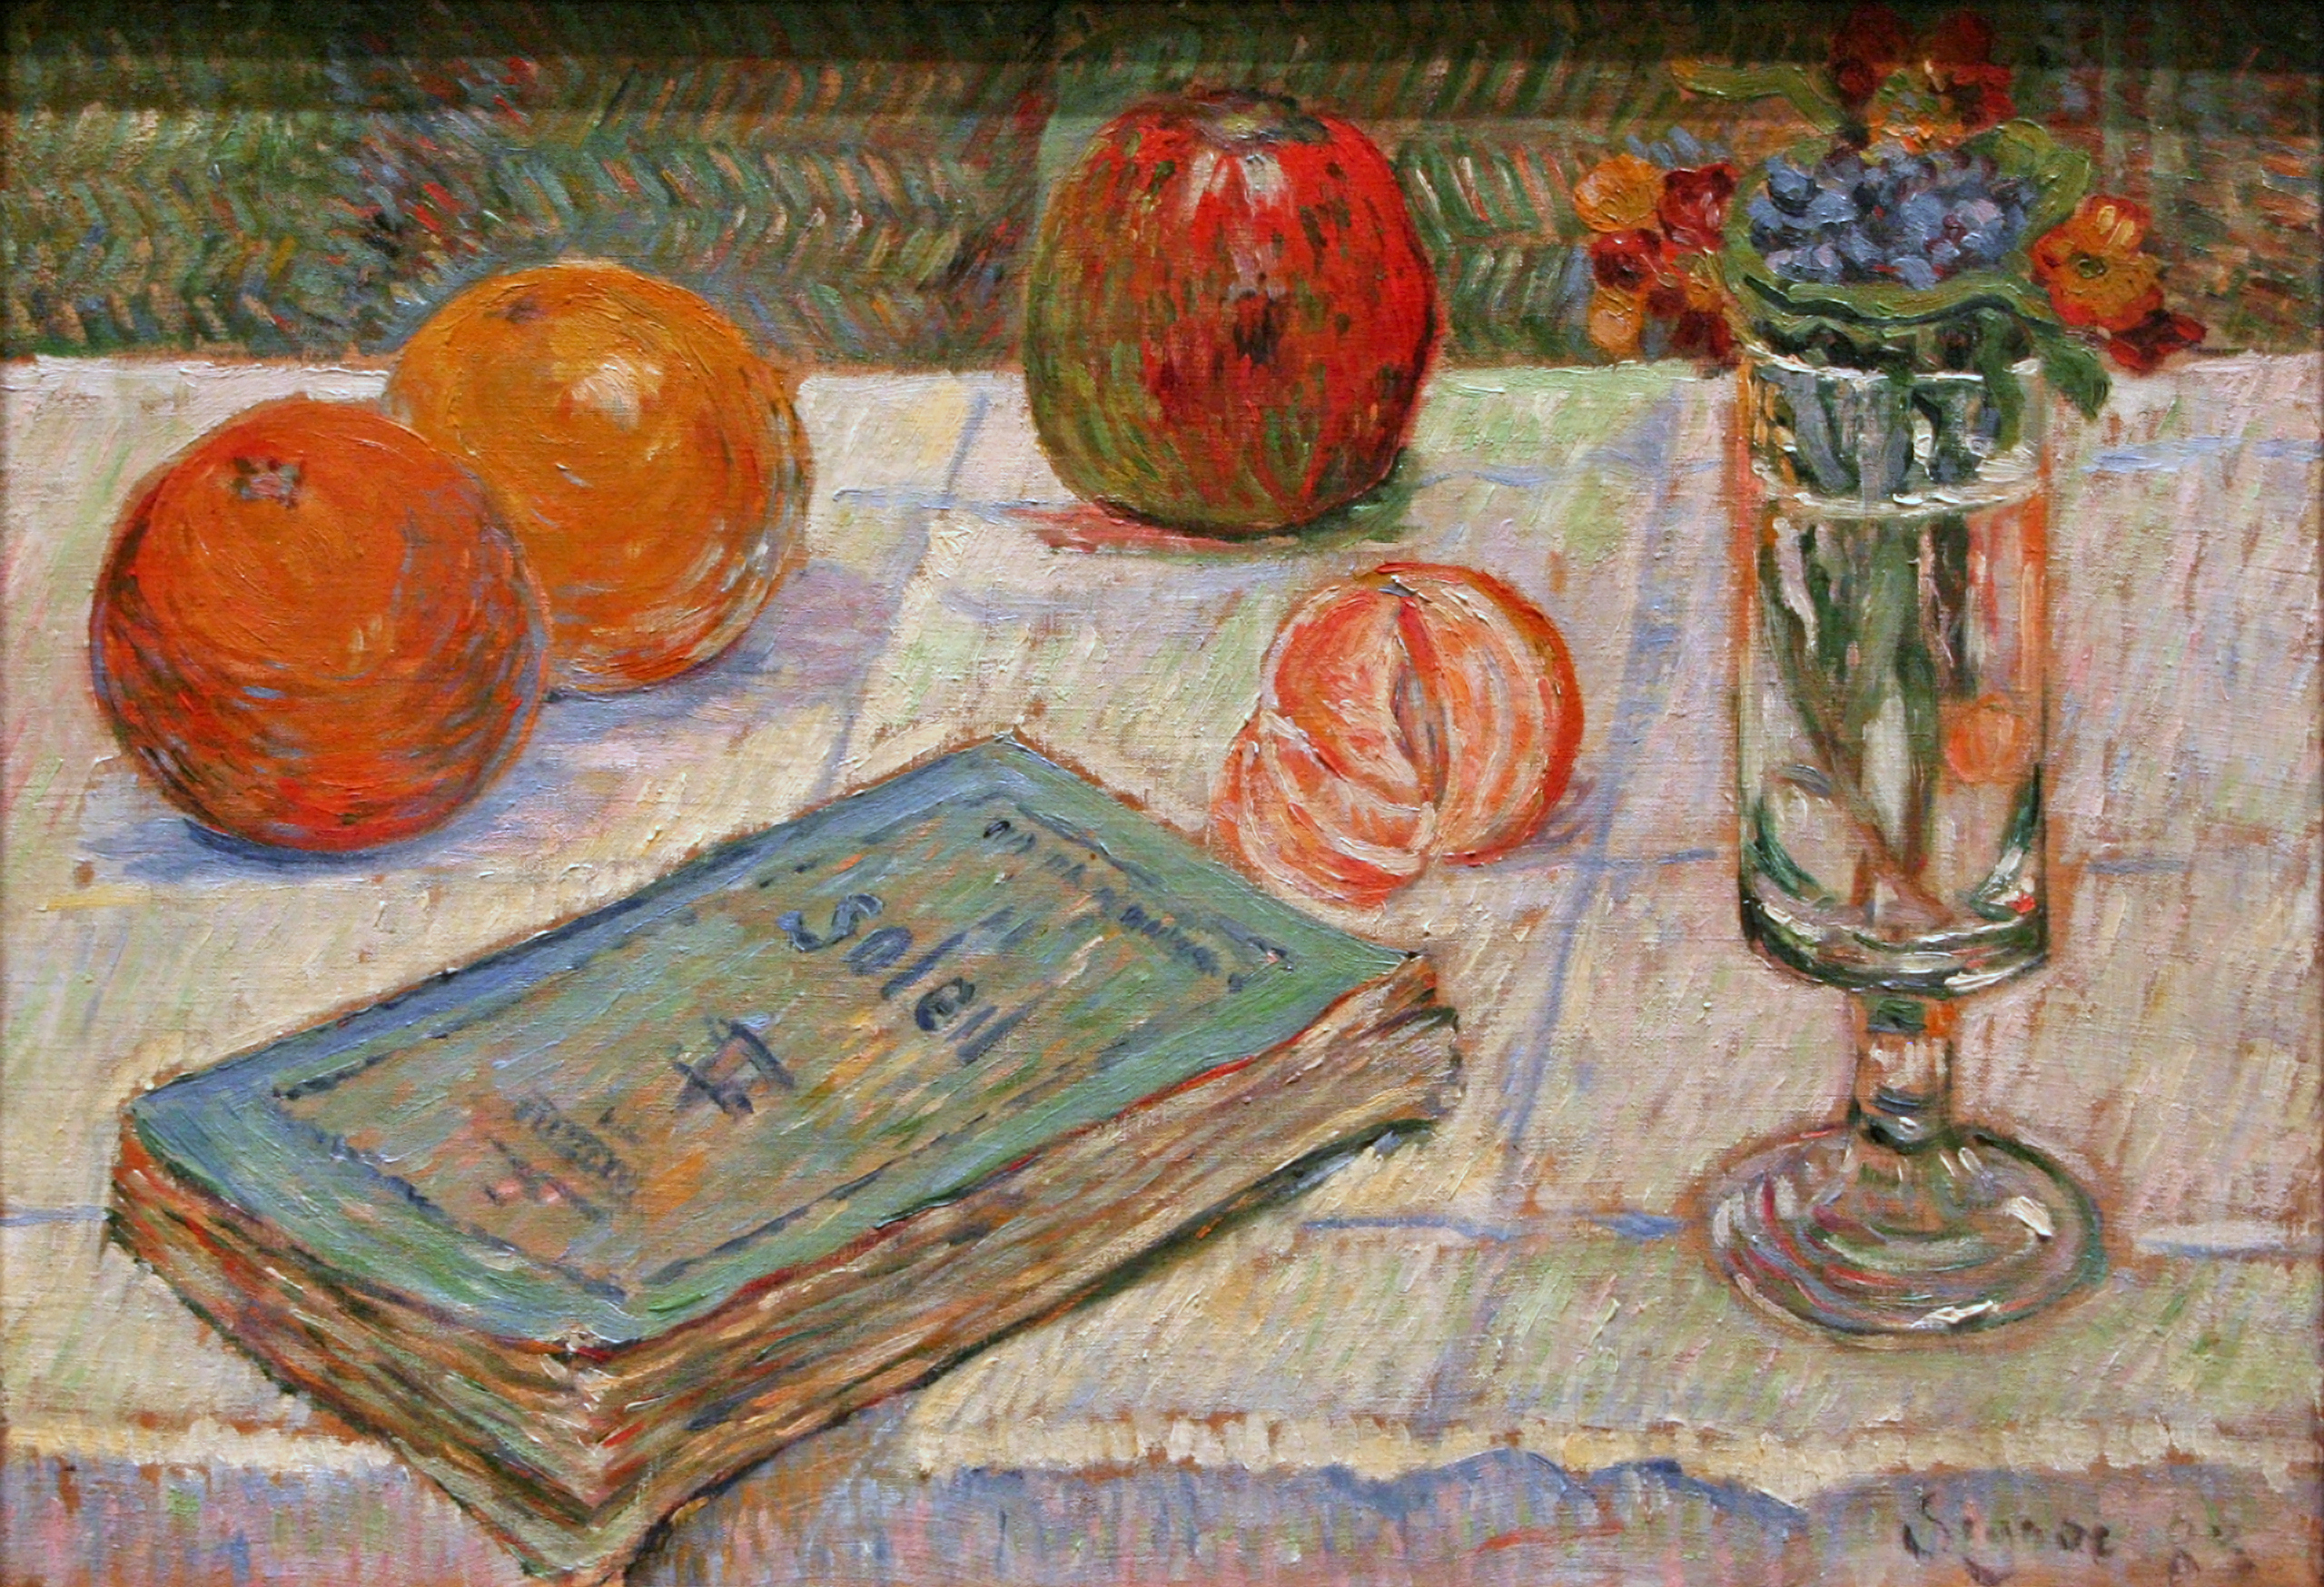 Still life With a Book and Oranges by Paul Signac - 1883 - 32,5 x 46,5 cm Alte Nationalgalerie